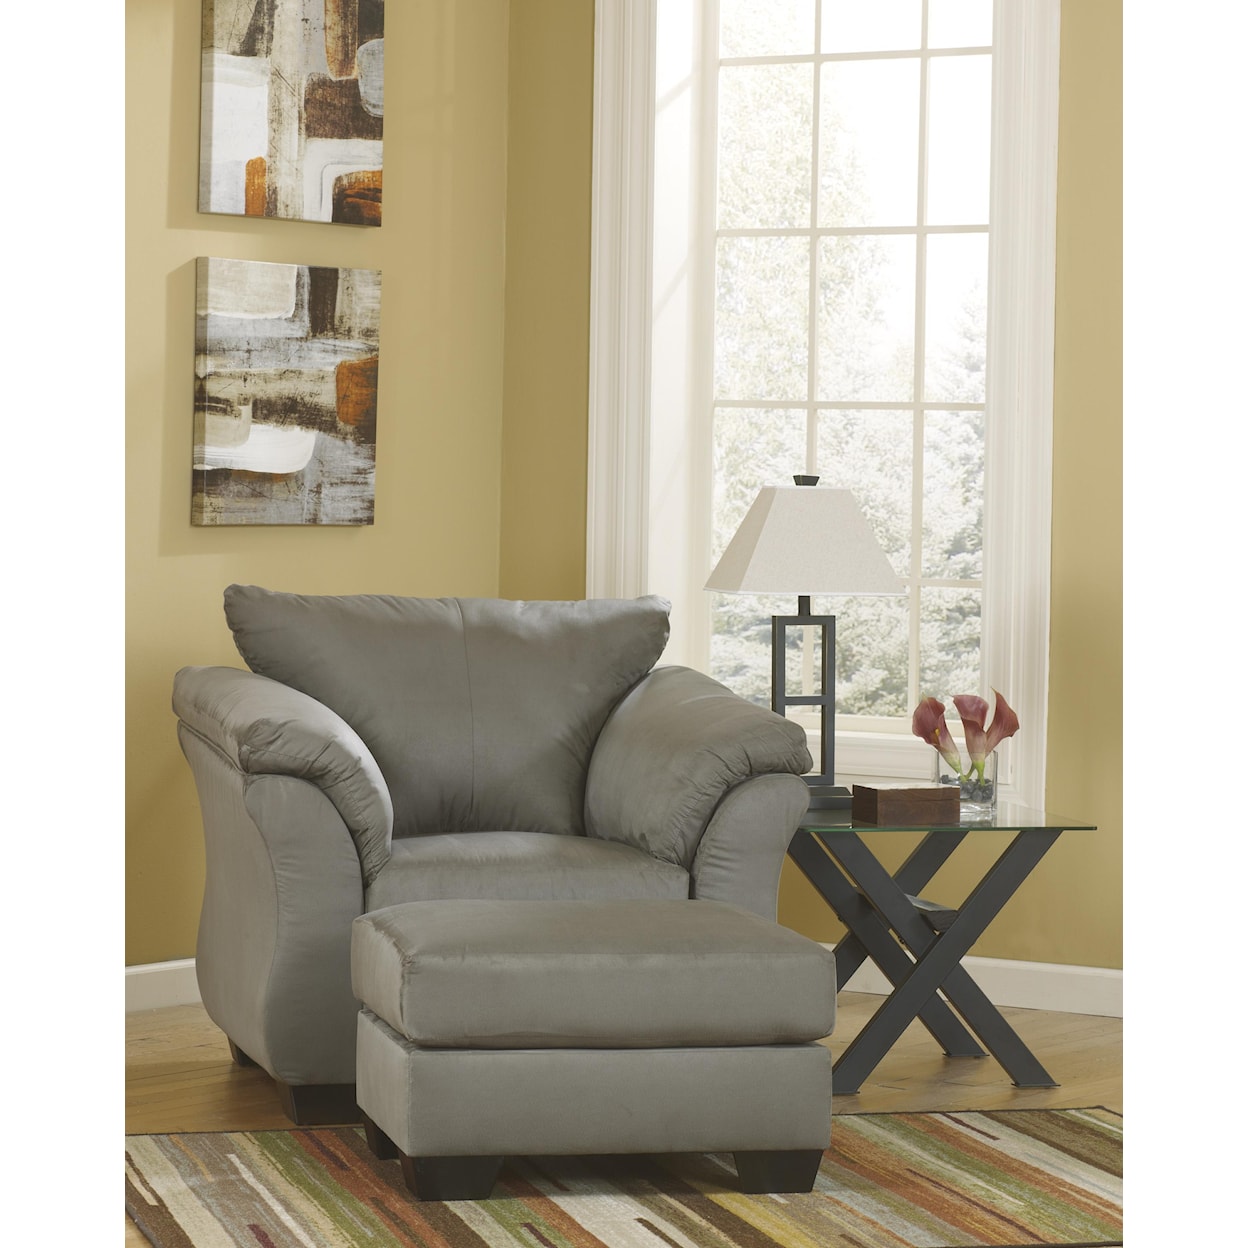 Ashley Darcy Darcy Upholstered Chair